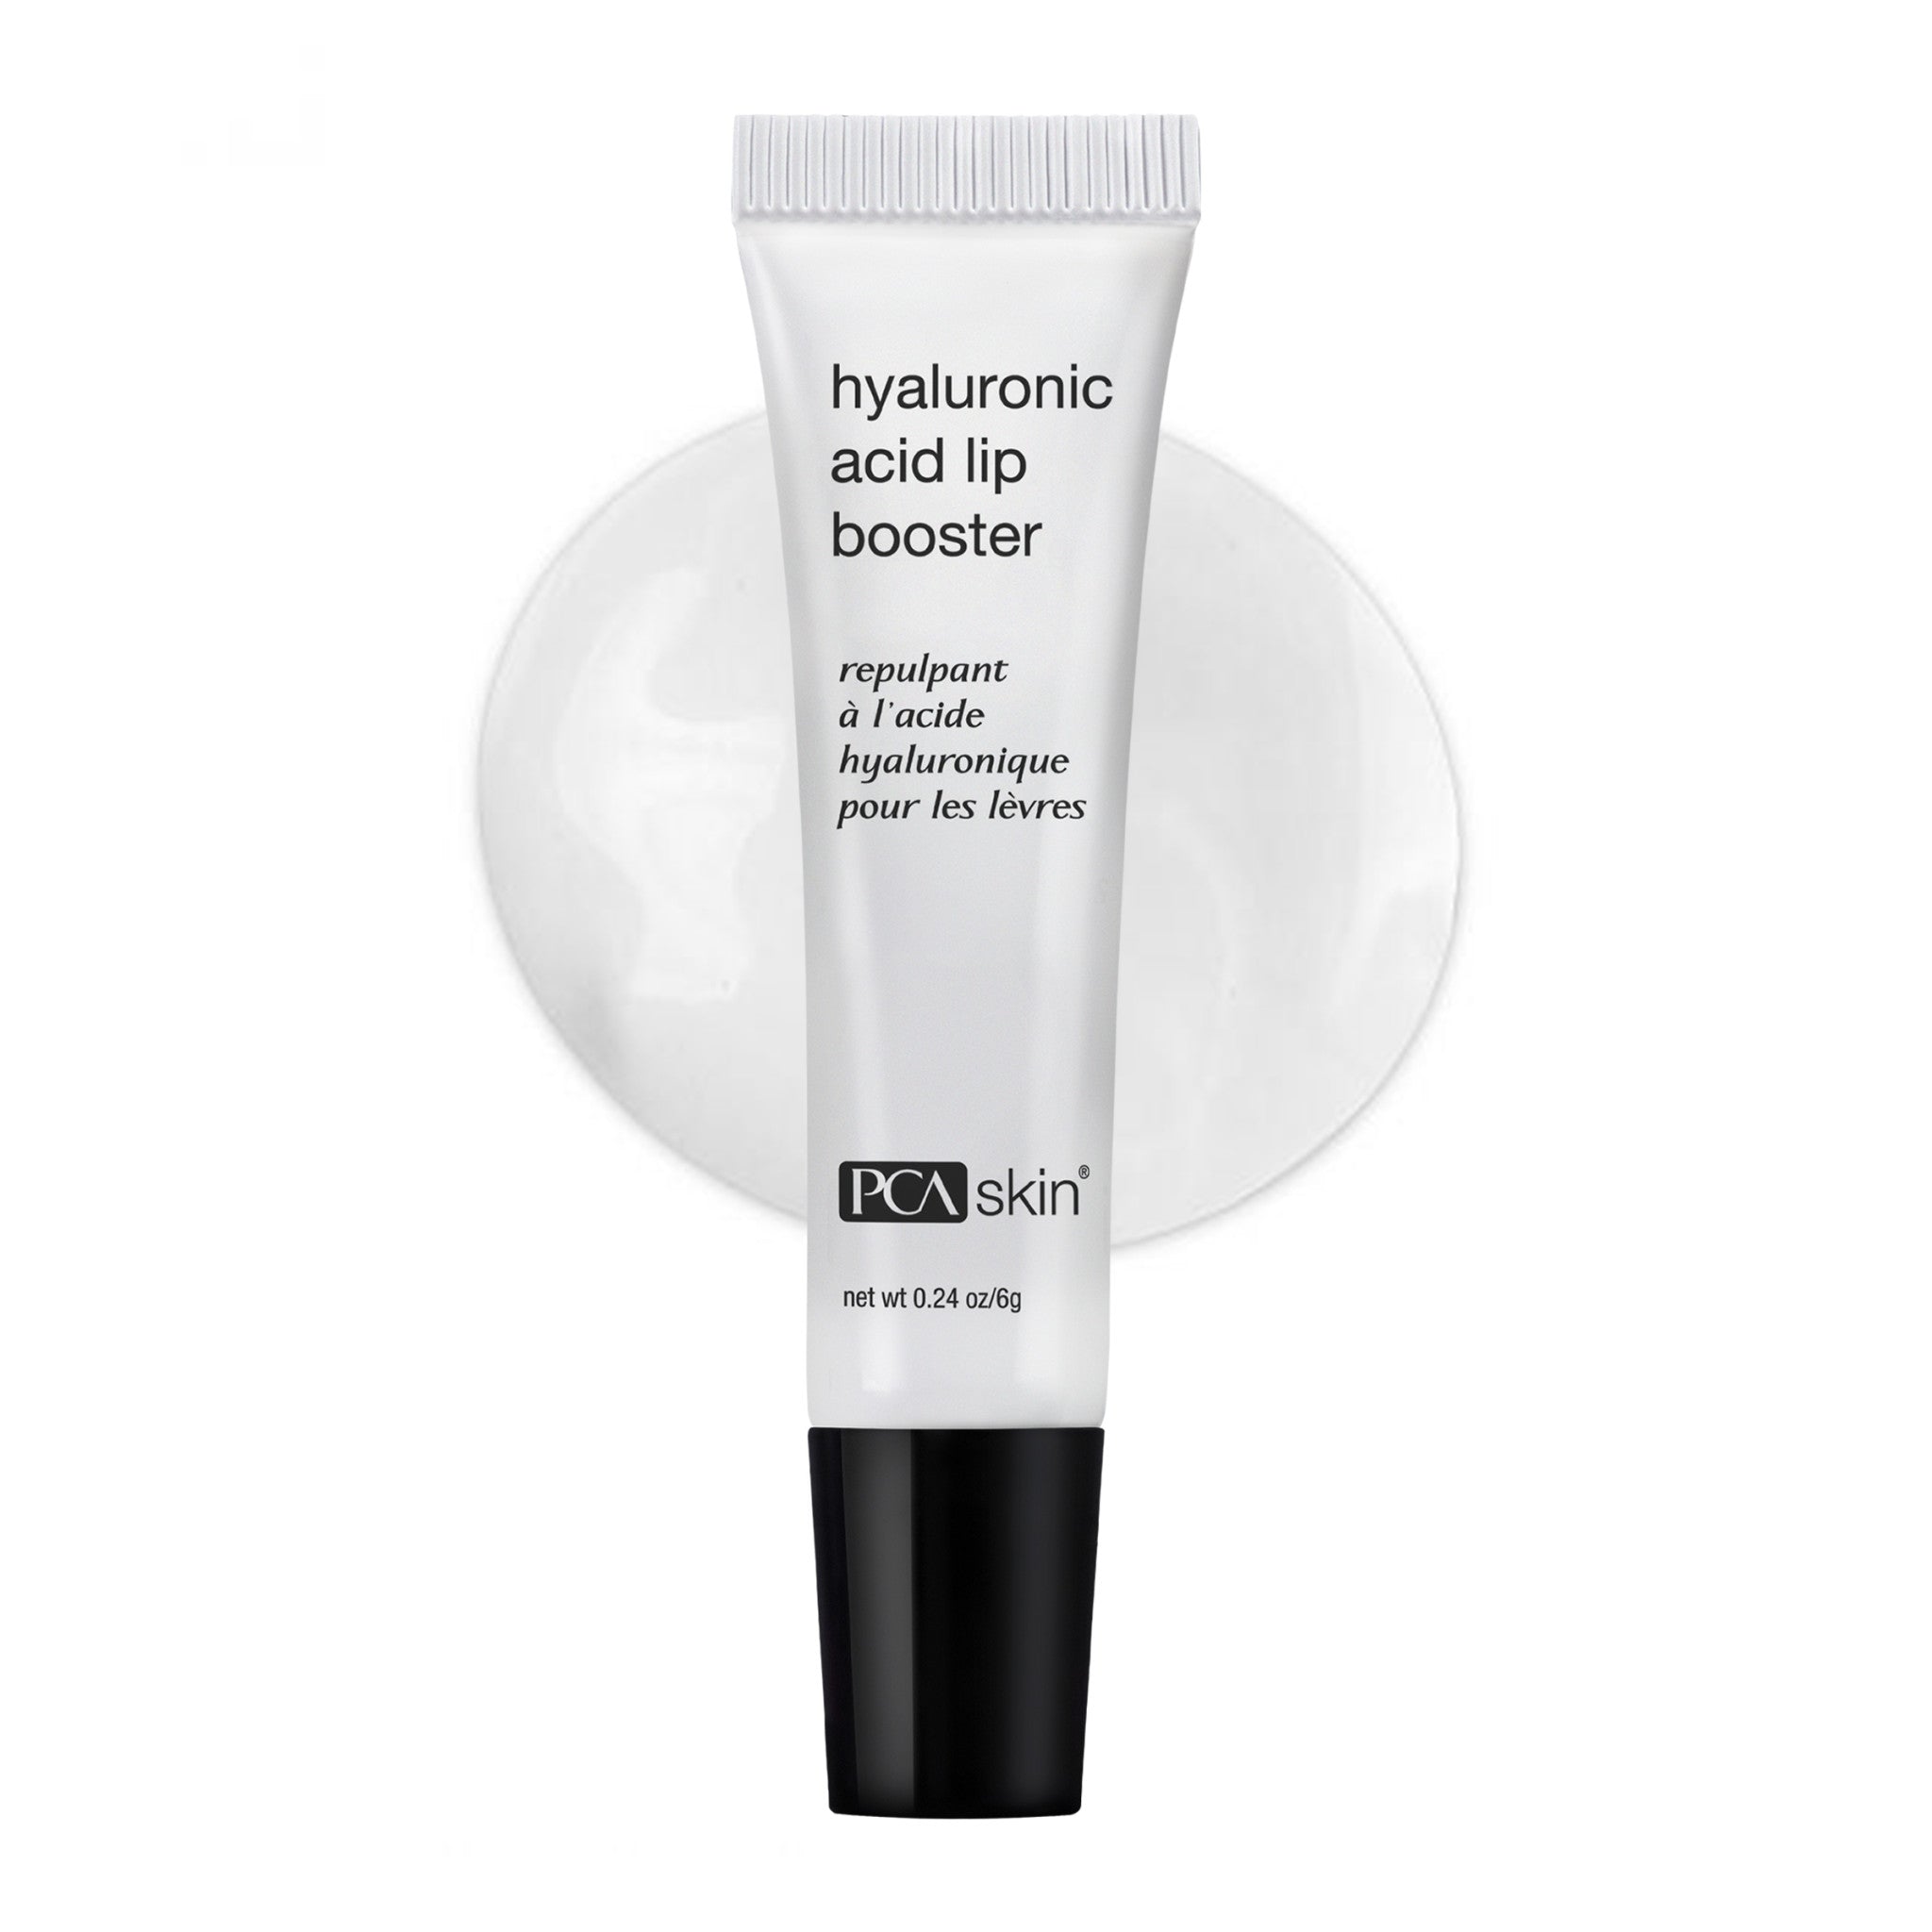 PCA Skin Hyaluronic Acid Lip Booster main image. This product is in the color clear